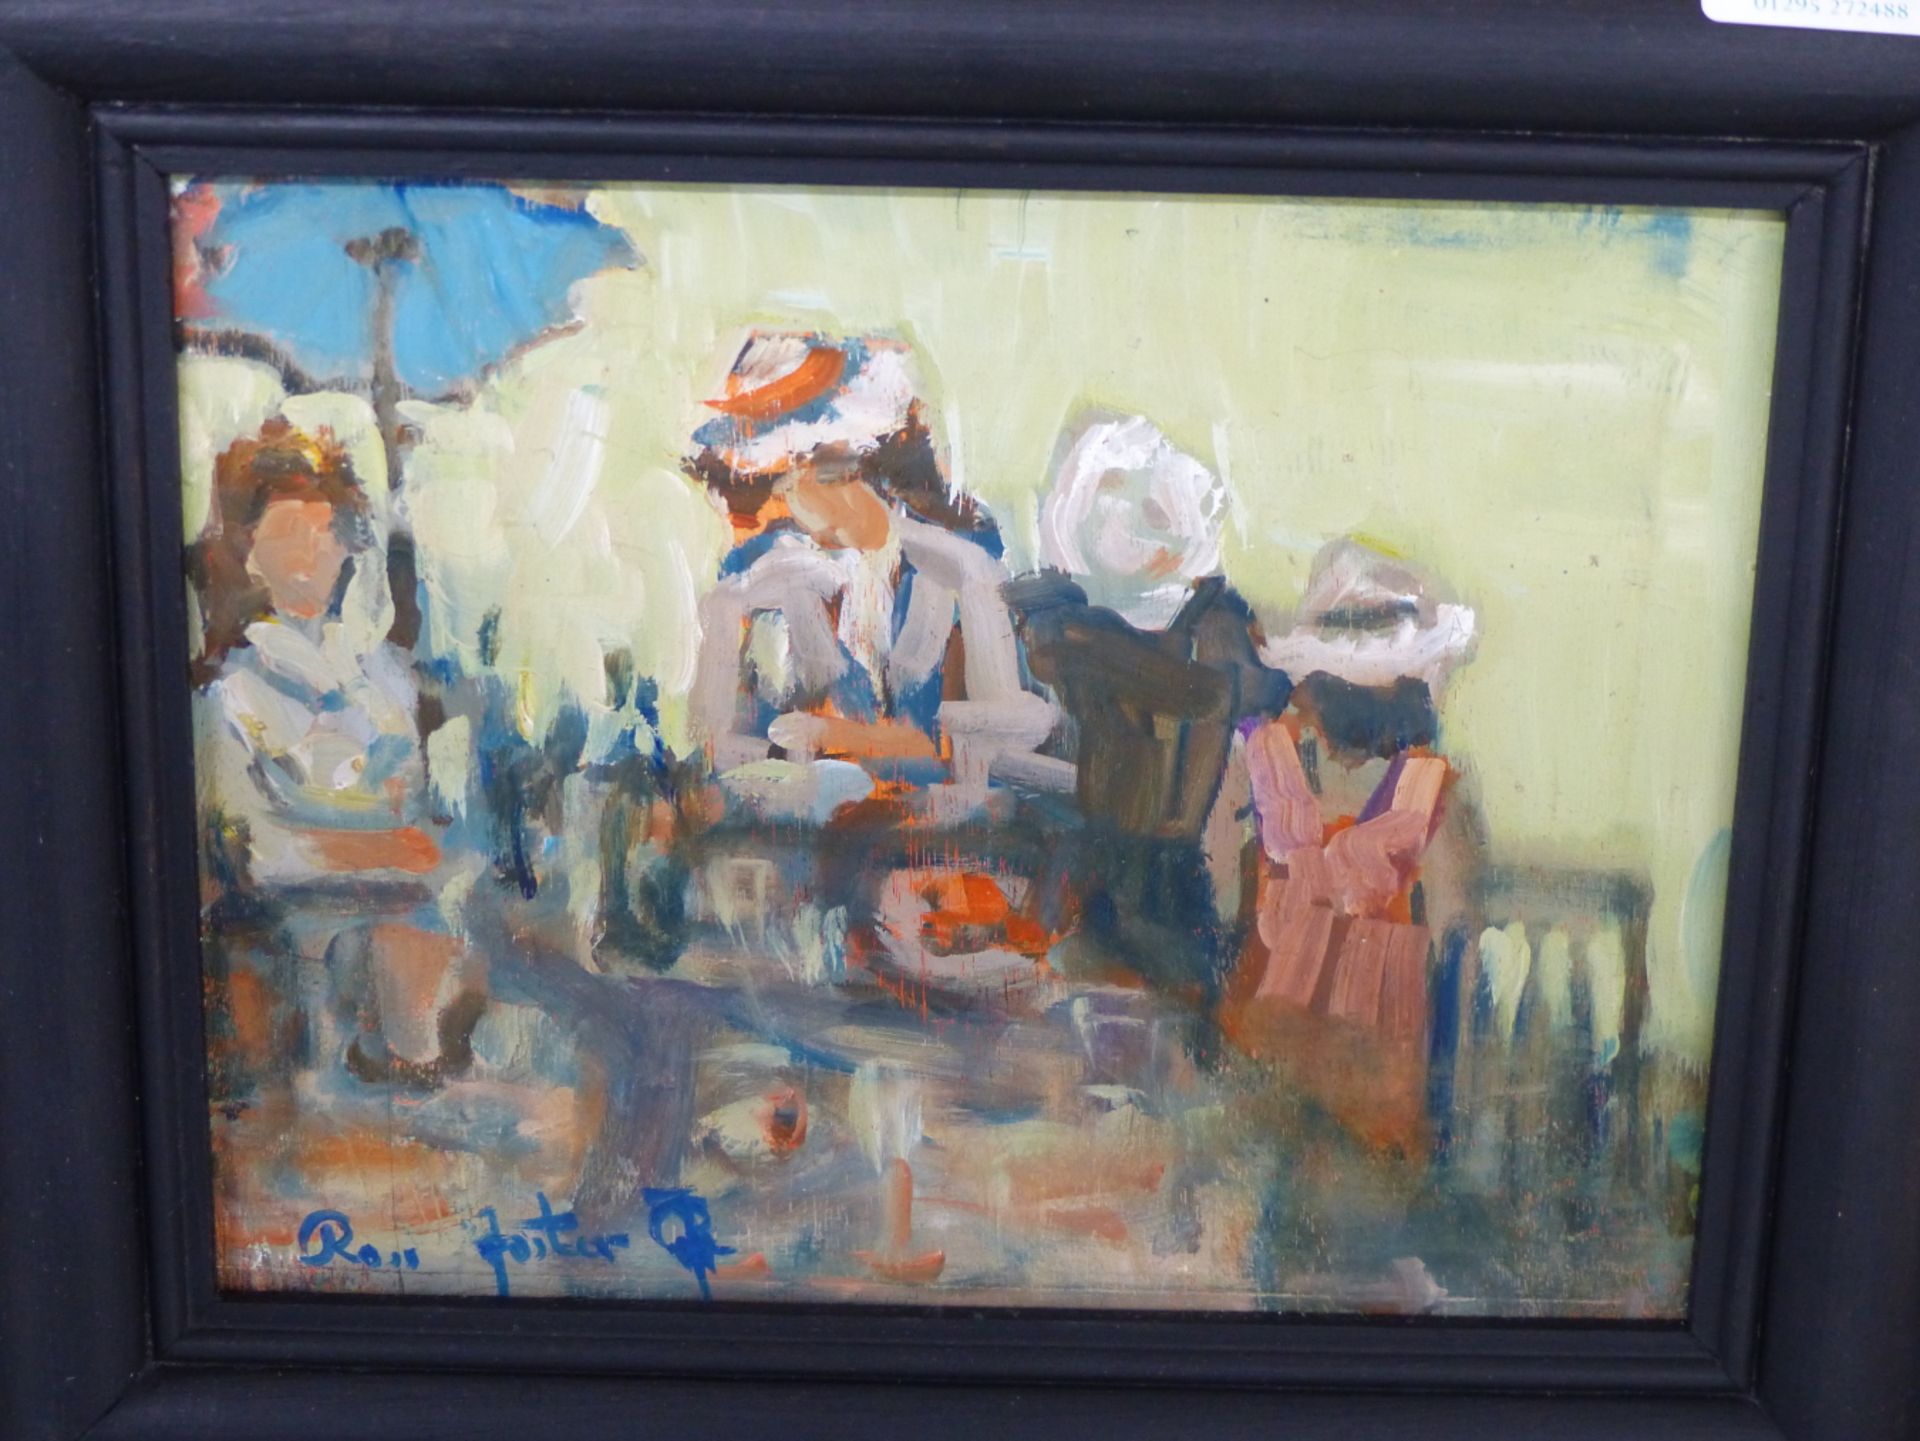 ROSS FOSTER (BBC ARTIST OF THE YEAR), 20THC BRITISH. CONTEMPORARY IMPRESSIONIST DEPICTION OF AN